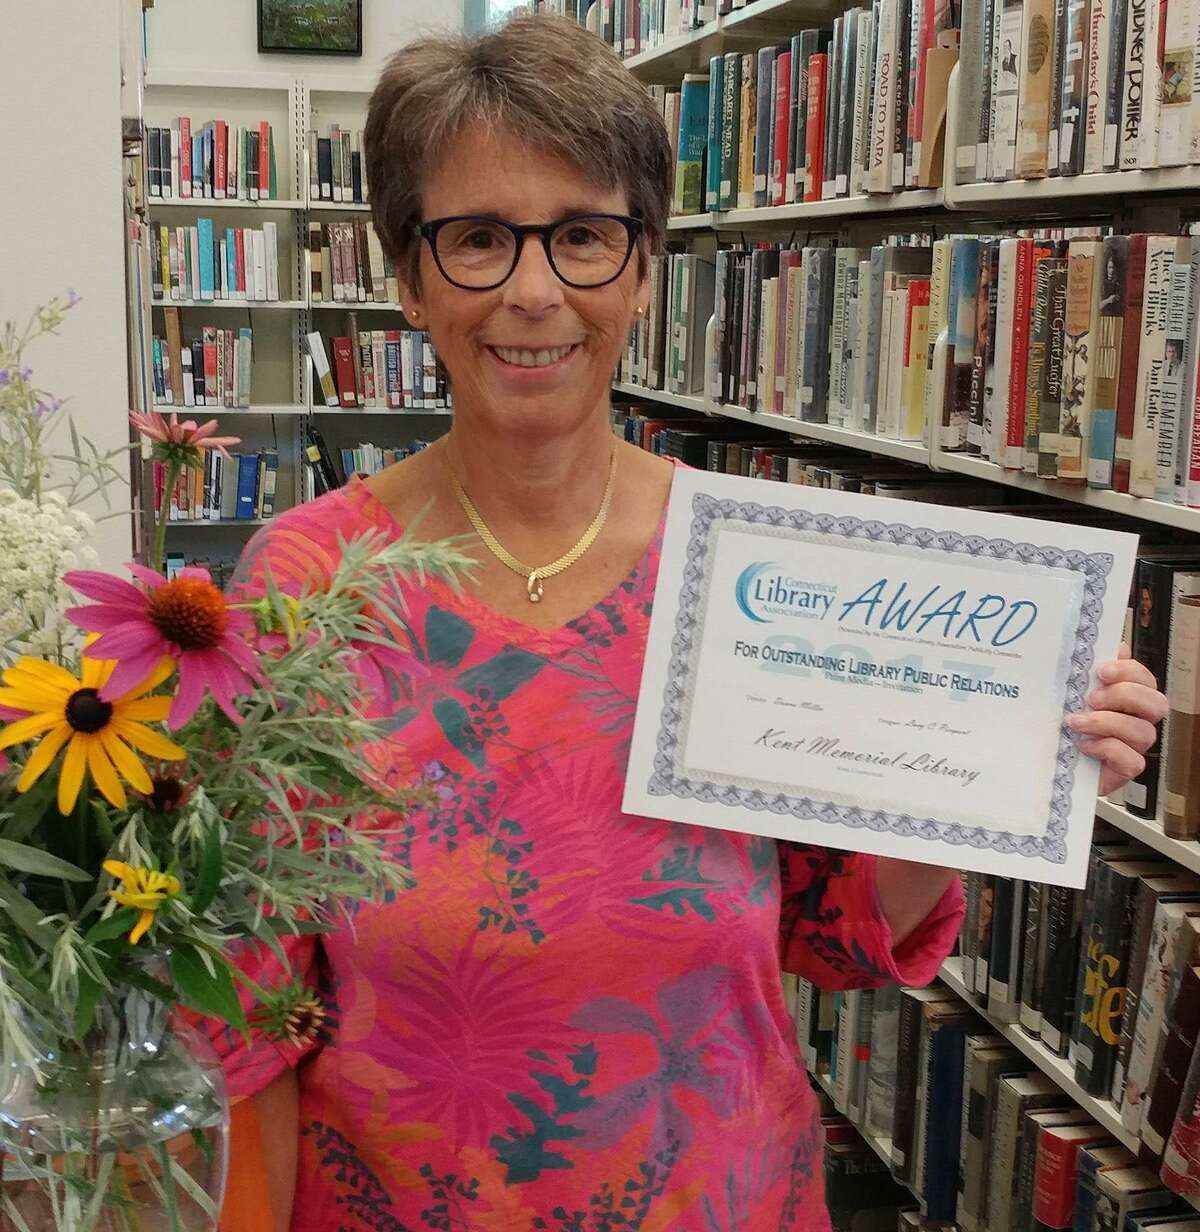 Kent Memorial Library’s Marketing and Special Events Director Lucy C. Pierpont holds the award won for Outstanding Library Public Relations in Print Media for the invitation and program materials for the 2016 Annual Spring Gala fundraising event in Kent.